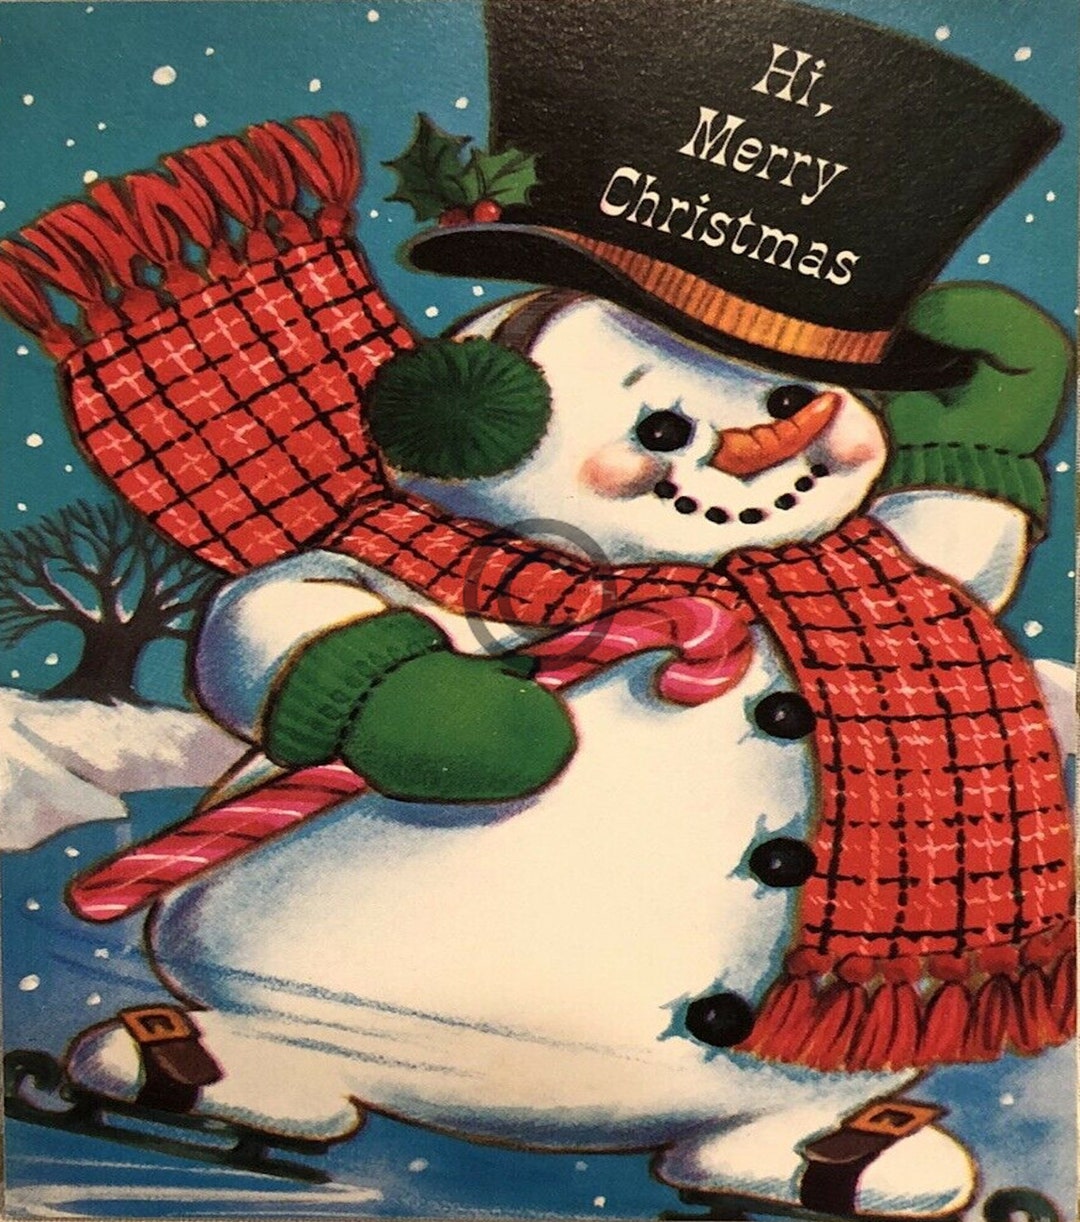 Vintage Merry Christmas Snowman Image Cards/tags/transfers/labels/logos ...